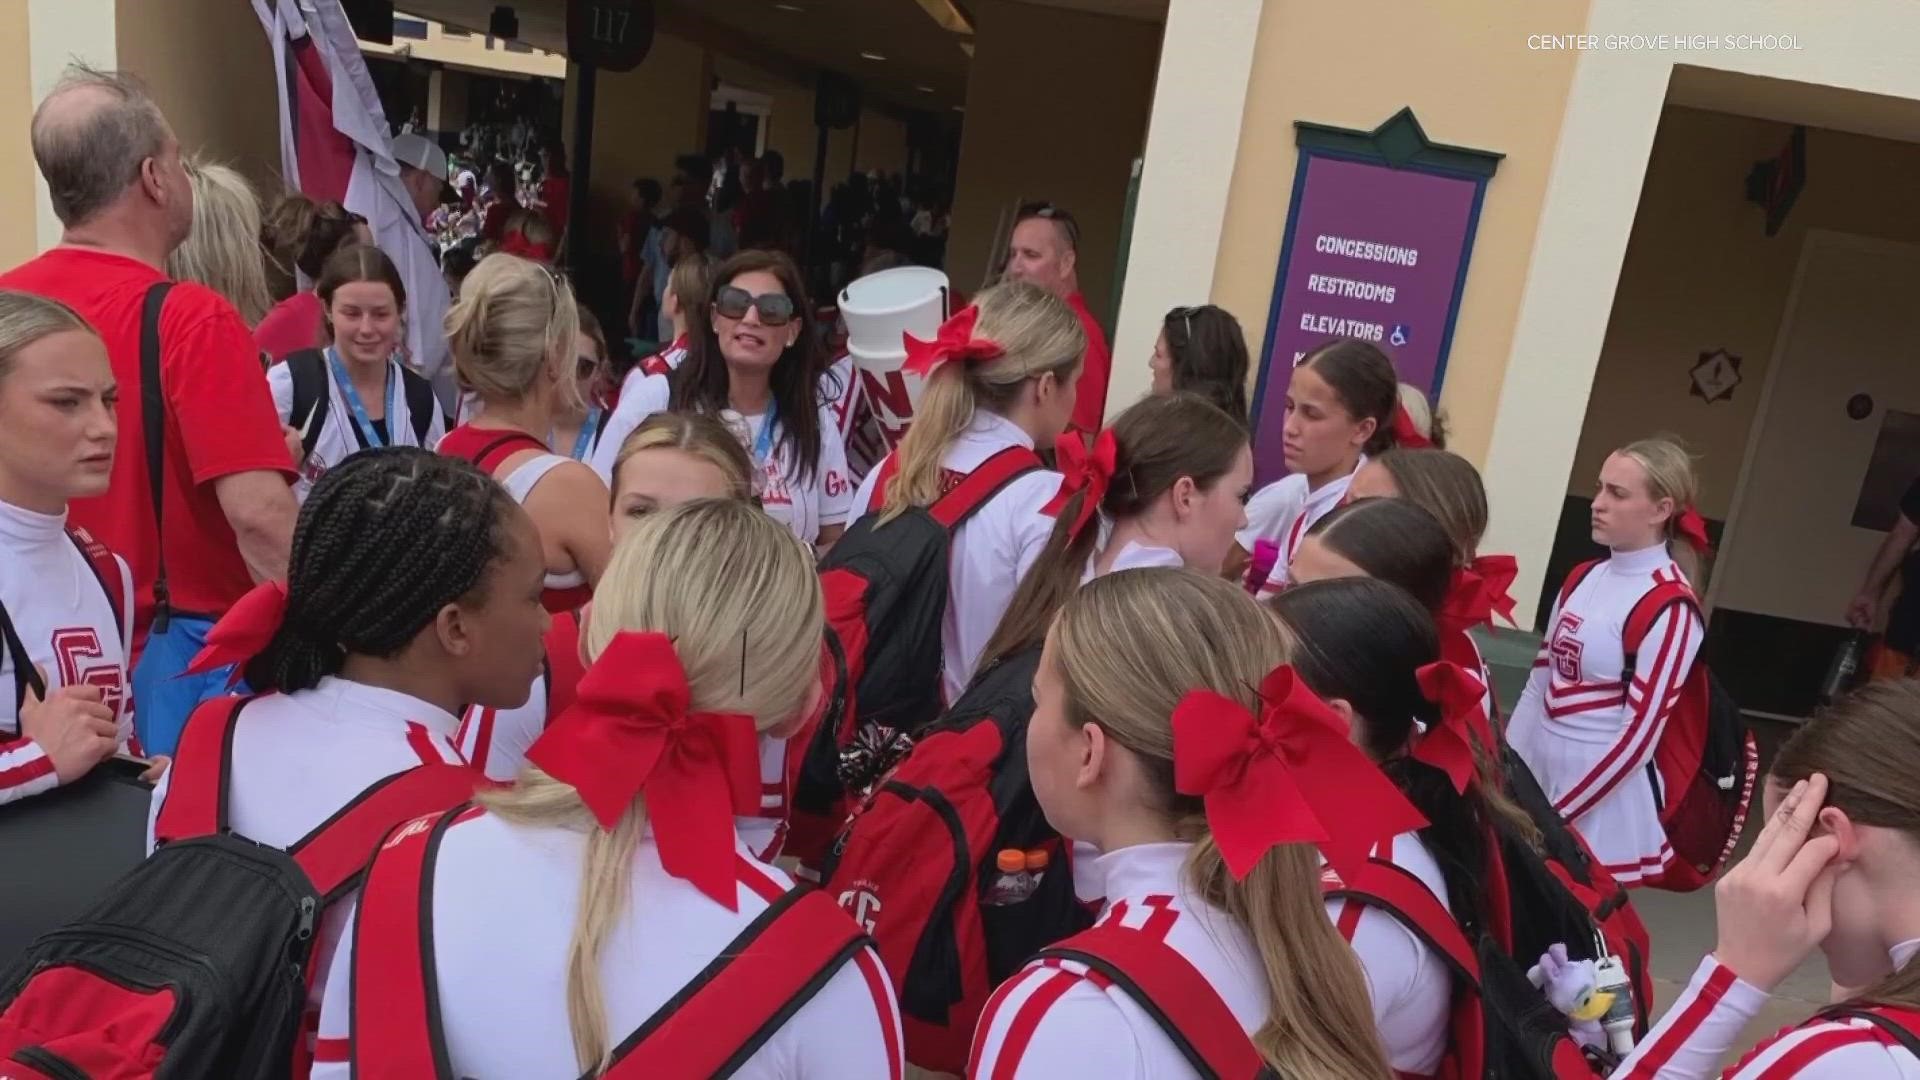 The team placed 4th overall at United Cheer Association's National Competition.